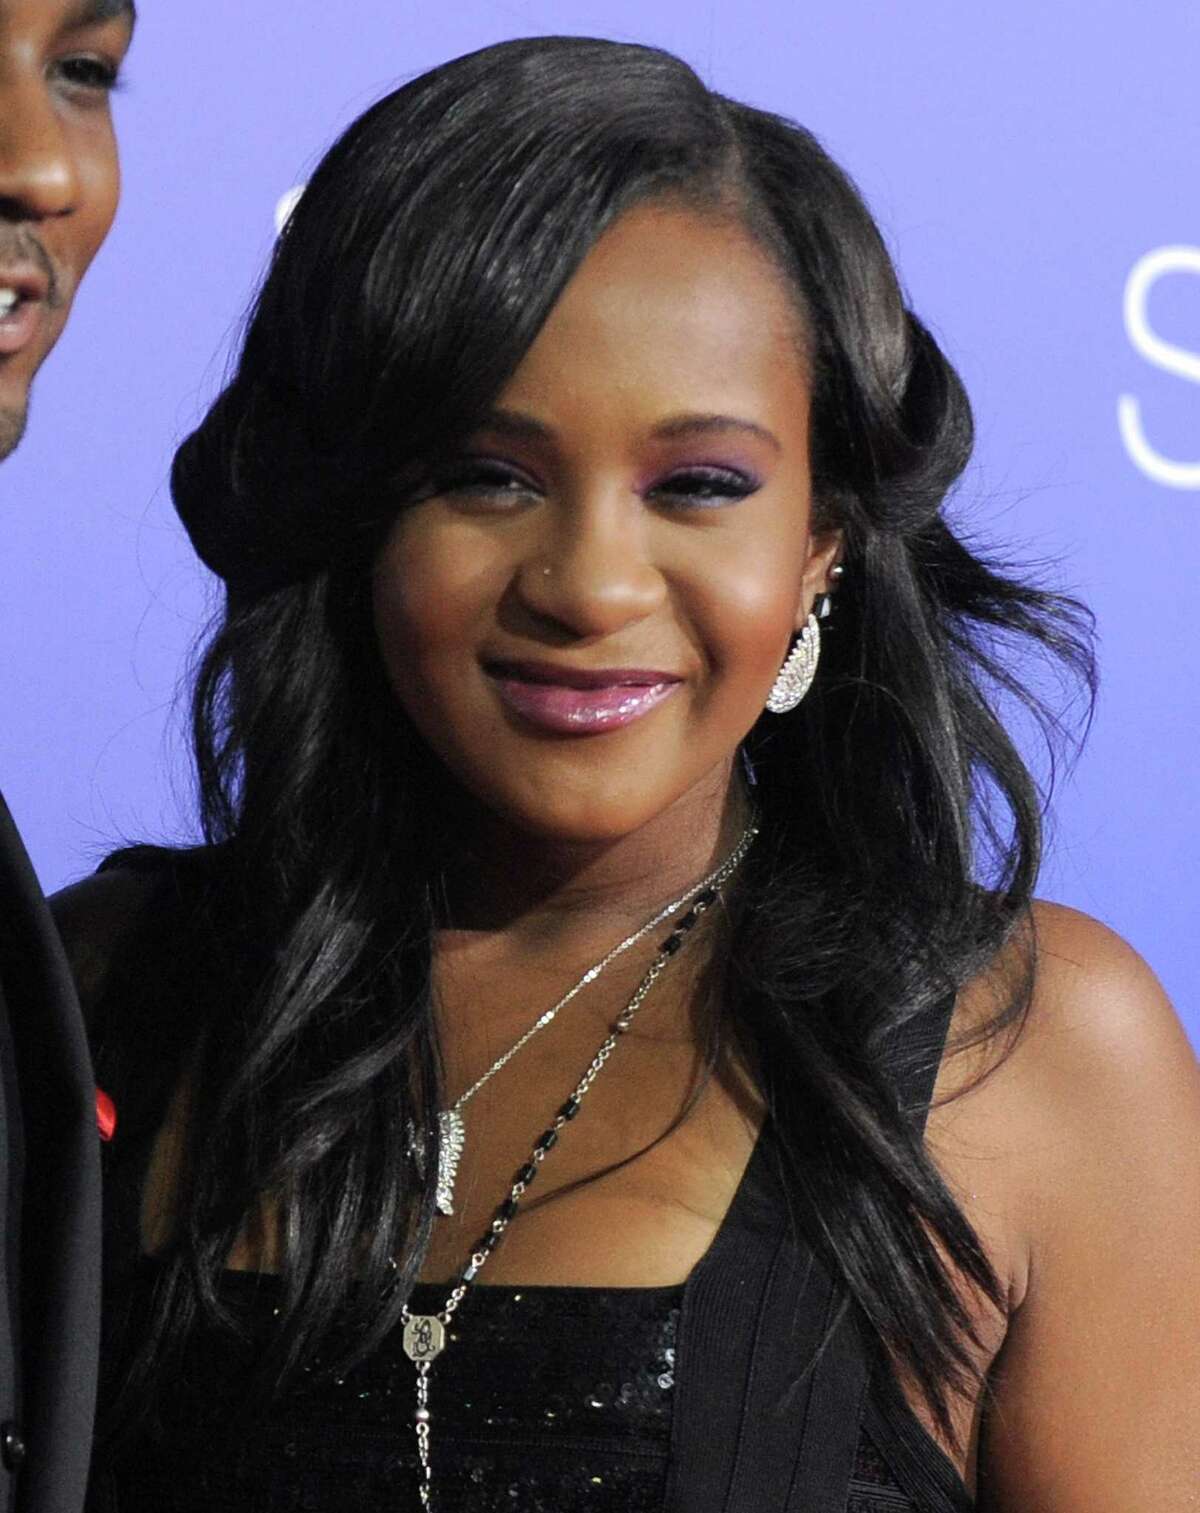 FILE - In this Aug. 16, 2012, file photo, Bobbi Kristina Brown attends the Los Angeles premiere of "Sparkle" at Grauman's Chinese Theatre in Los Angeles. The daughter of the late singer and entertainer Whitney Houston, who was in hospice care after months of receiving medical care, died on Sunday, July 26, 2015. (Photo by Jordan Strauss/Invision/AP, File)